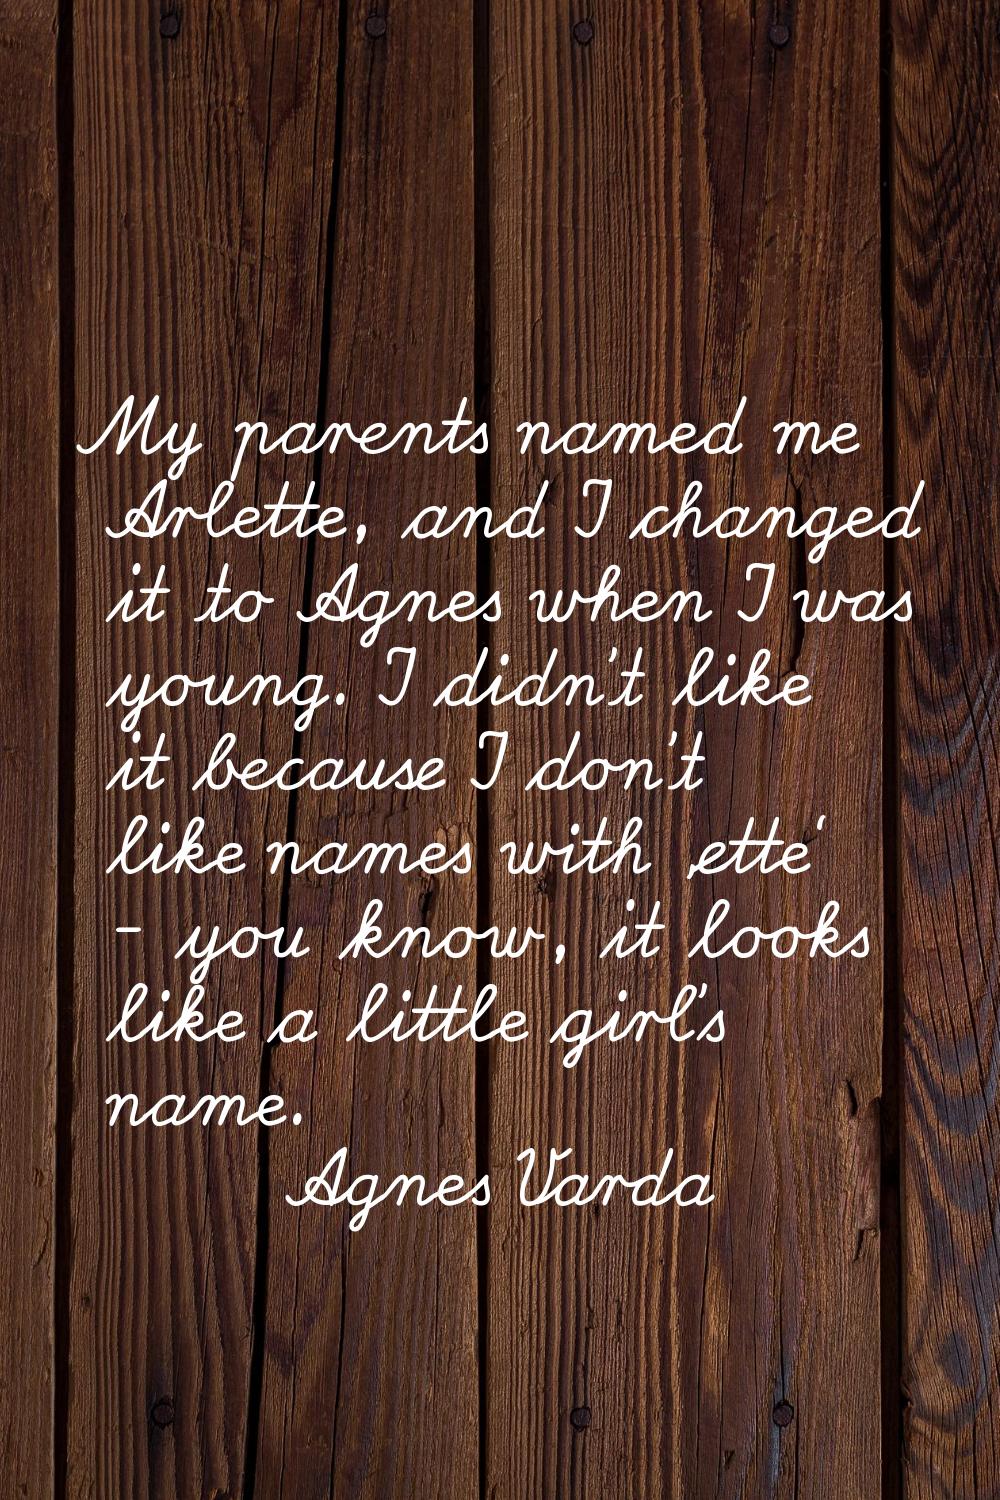 My parents named me Arlette, and I changed it to Agnes when I was young. I didn't like it because I